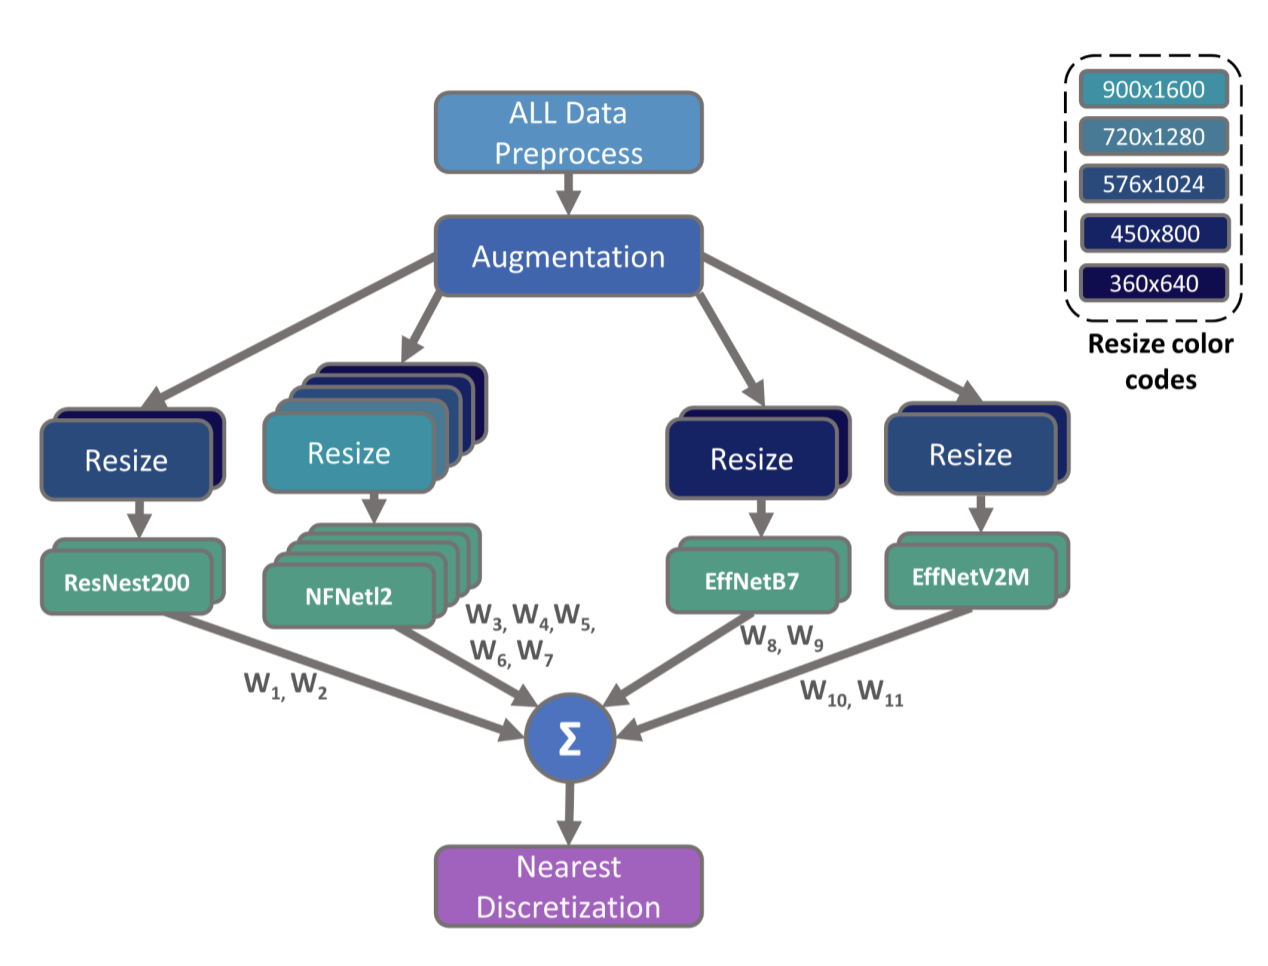 Flow diagram of full data processing and model training pipeline. Data is augmented, resized to various dimensions, and then used to train four different types of model backbones.